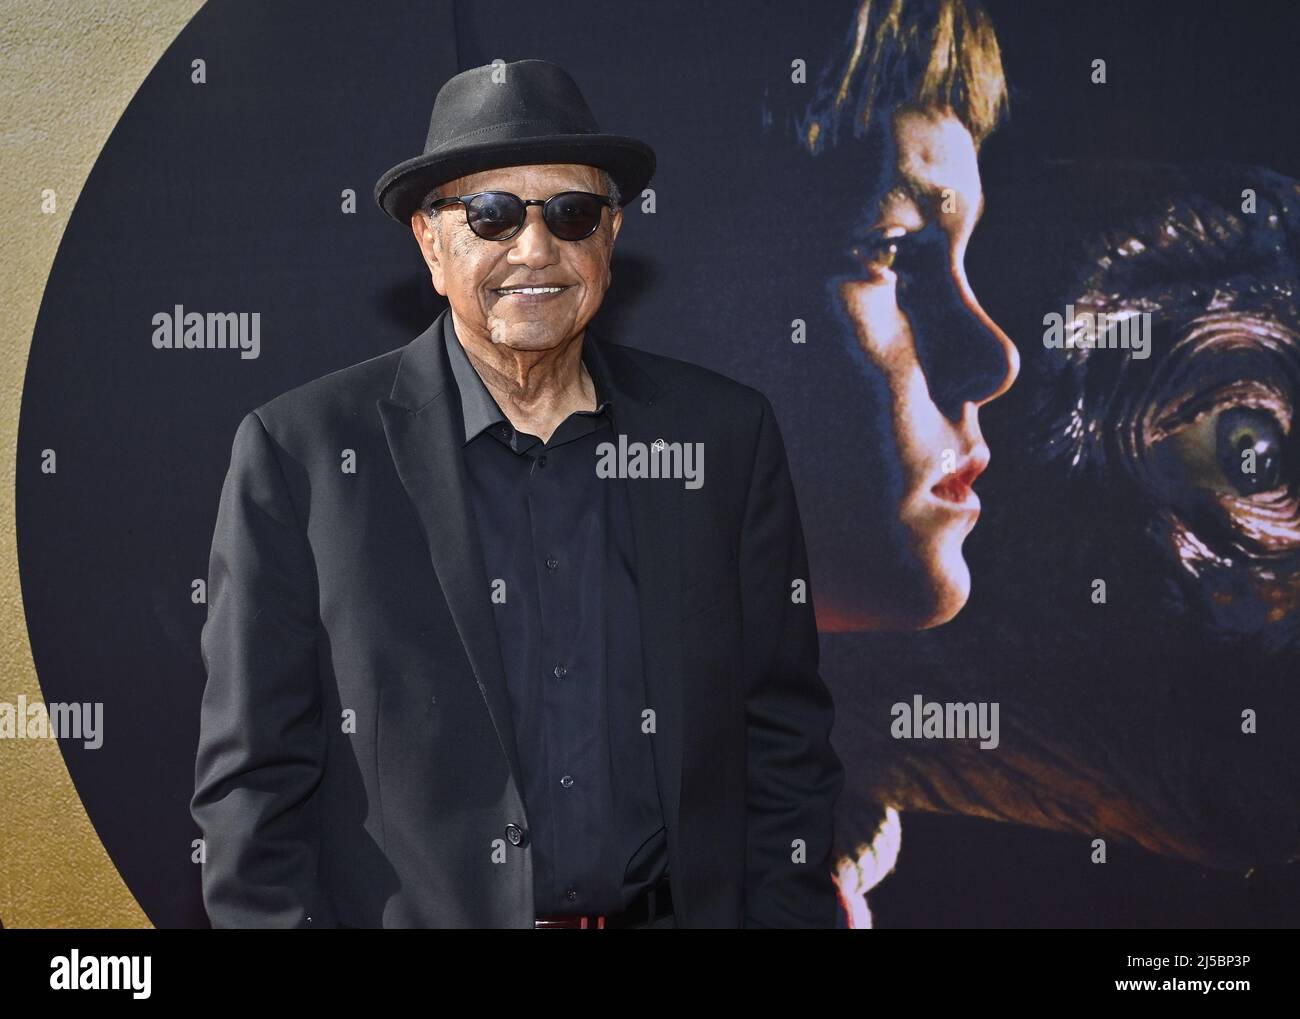 Los Angeles, USA. 22nd Apr, 2022. Floyd Norman attends the 40th Anniversary Screening of 'E.T. the Extra-Terrestrial' presented on the Opening Night of the 2022 TCM Classic Film Festival at the TCL Chinese Theater in the Hollywood section of Los Angeles on Thursday, April 21, 2022. Photo by Jim Ruymen/UPI Credit: UPI/Alamy Live News Stock Photo